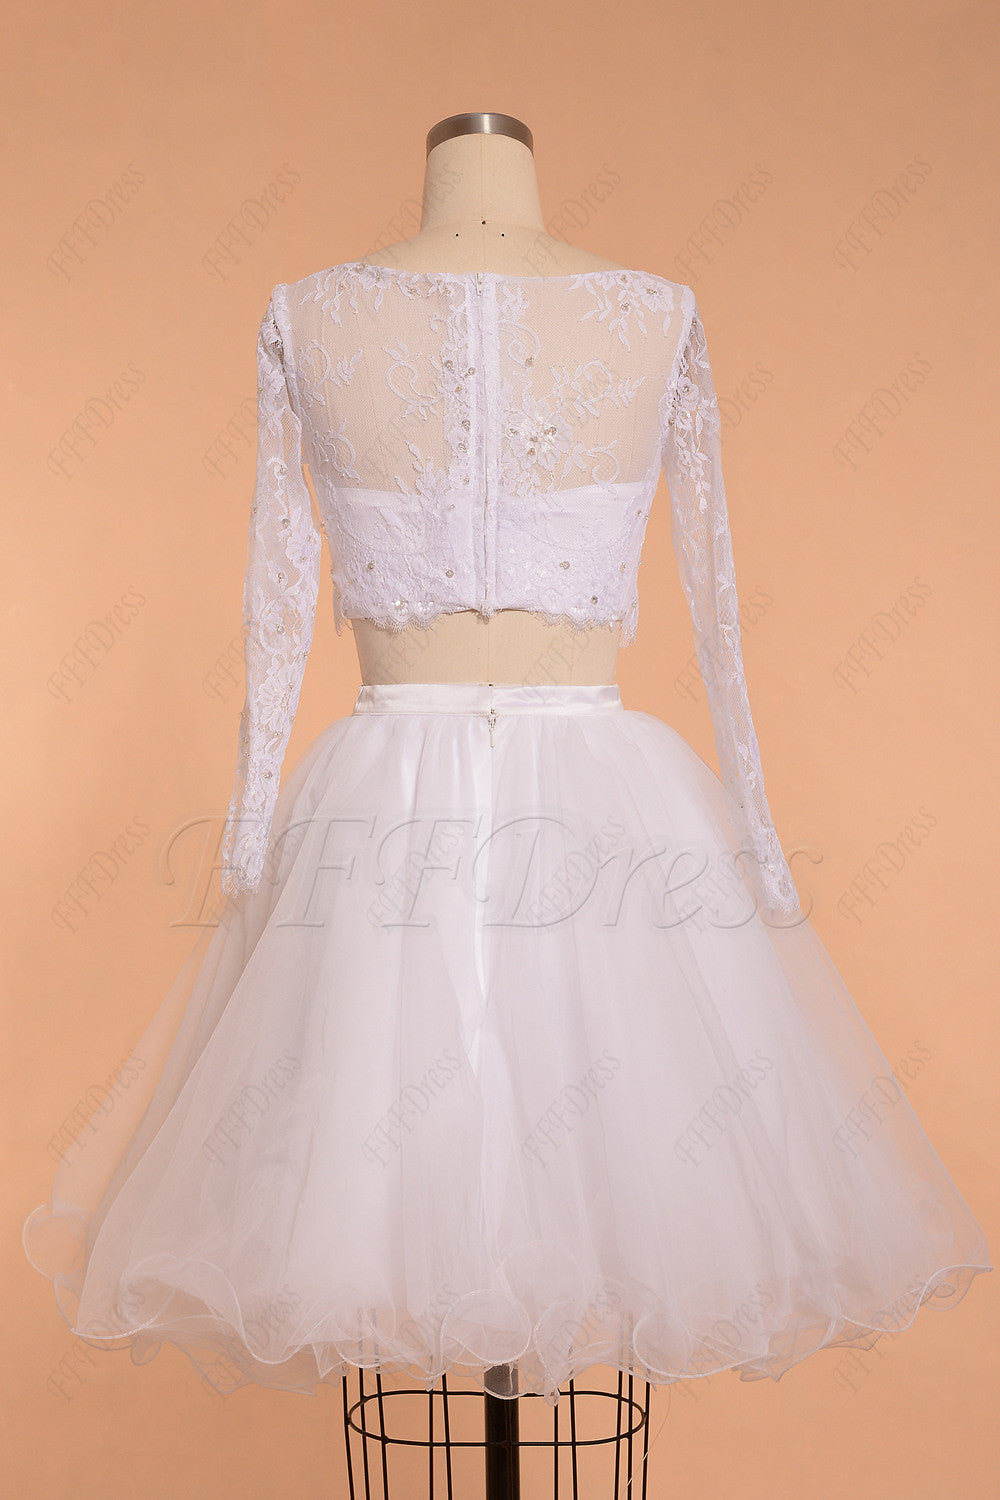 Two Piece Short Prom Dress White Long Sleeves Homecoming Dresses